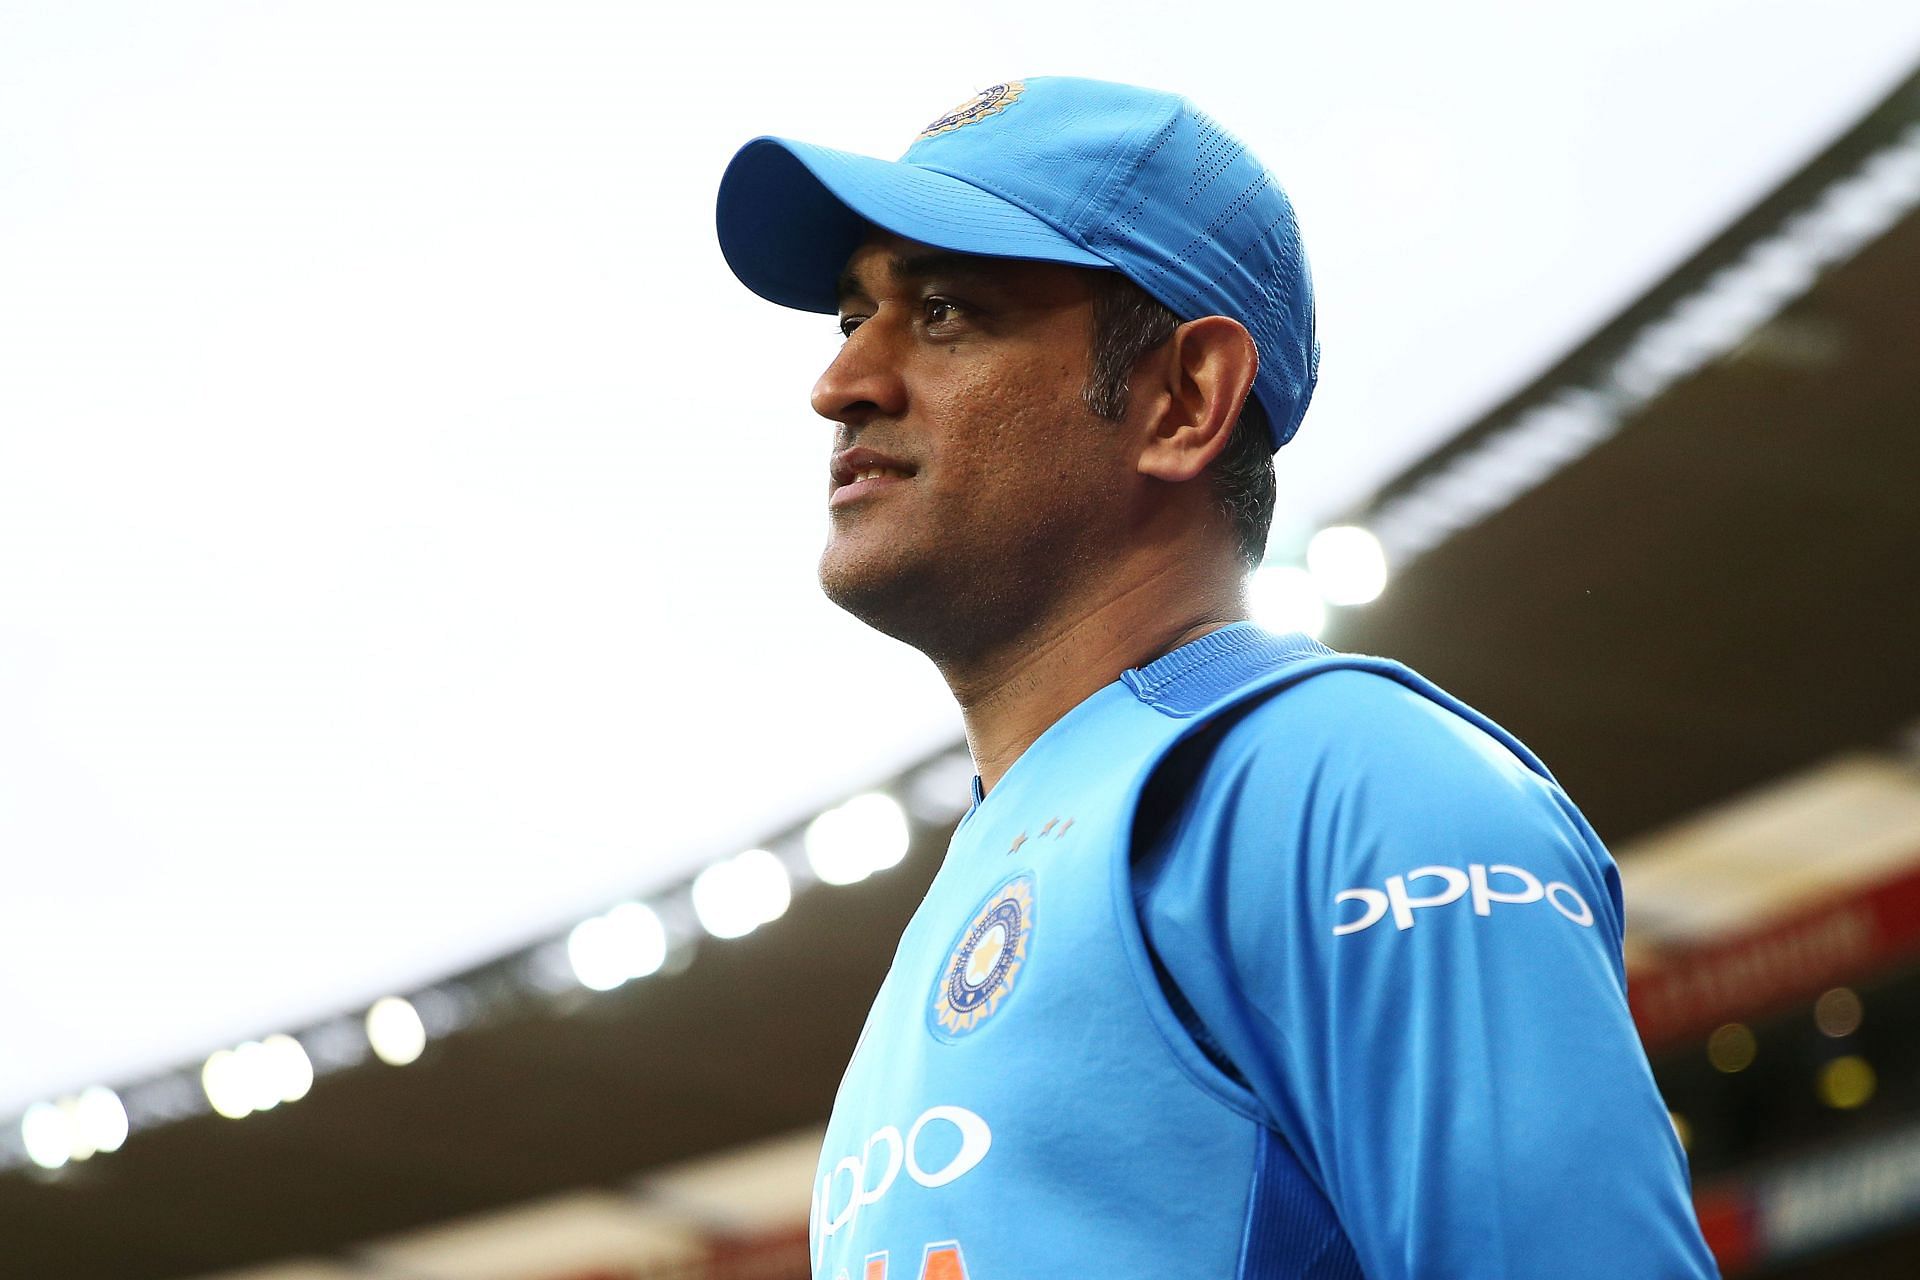 MS Dhoni played his last international game in ODI World Cup 2019